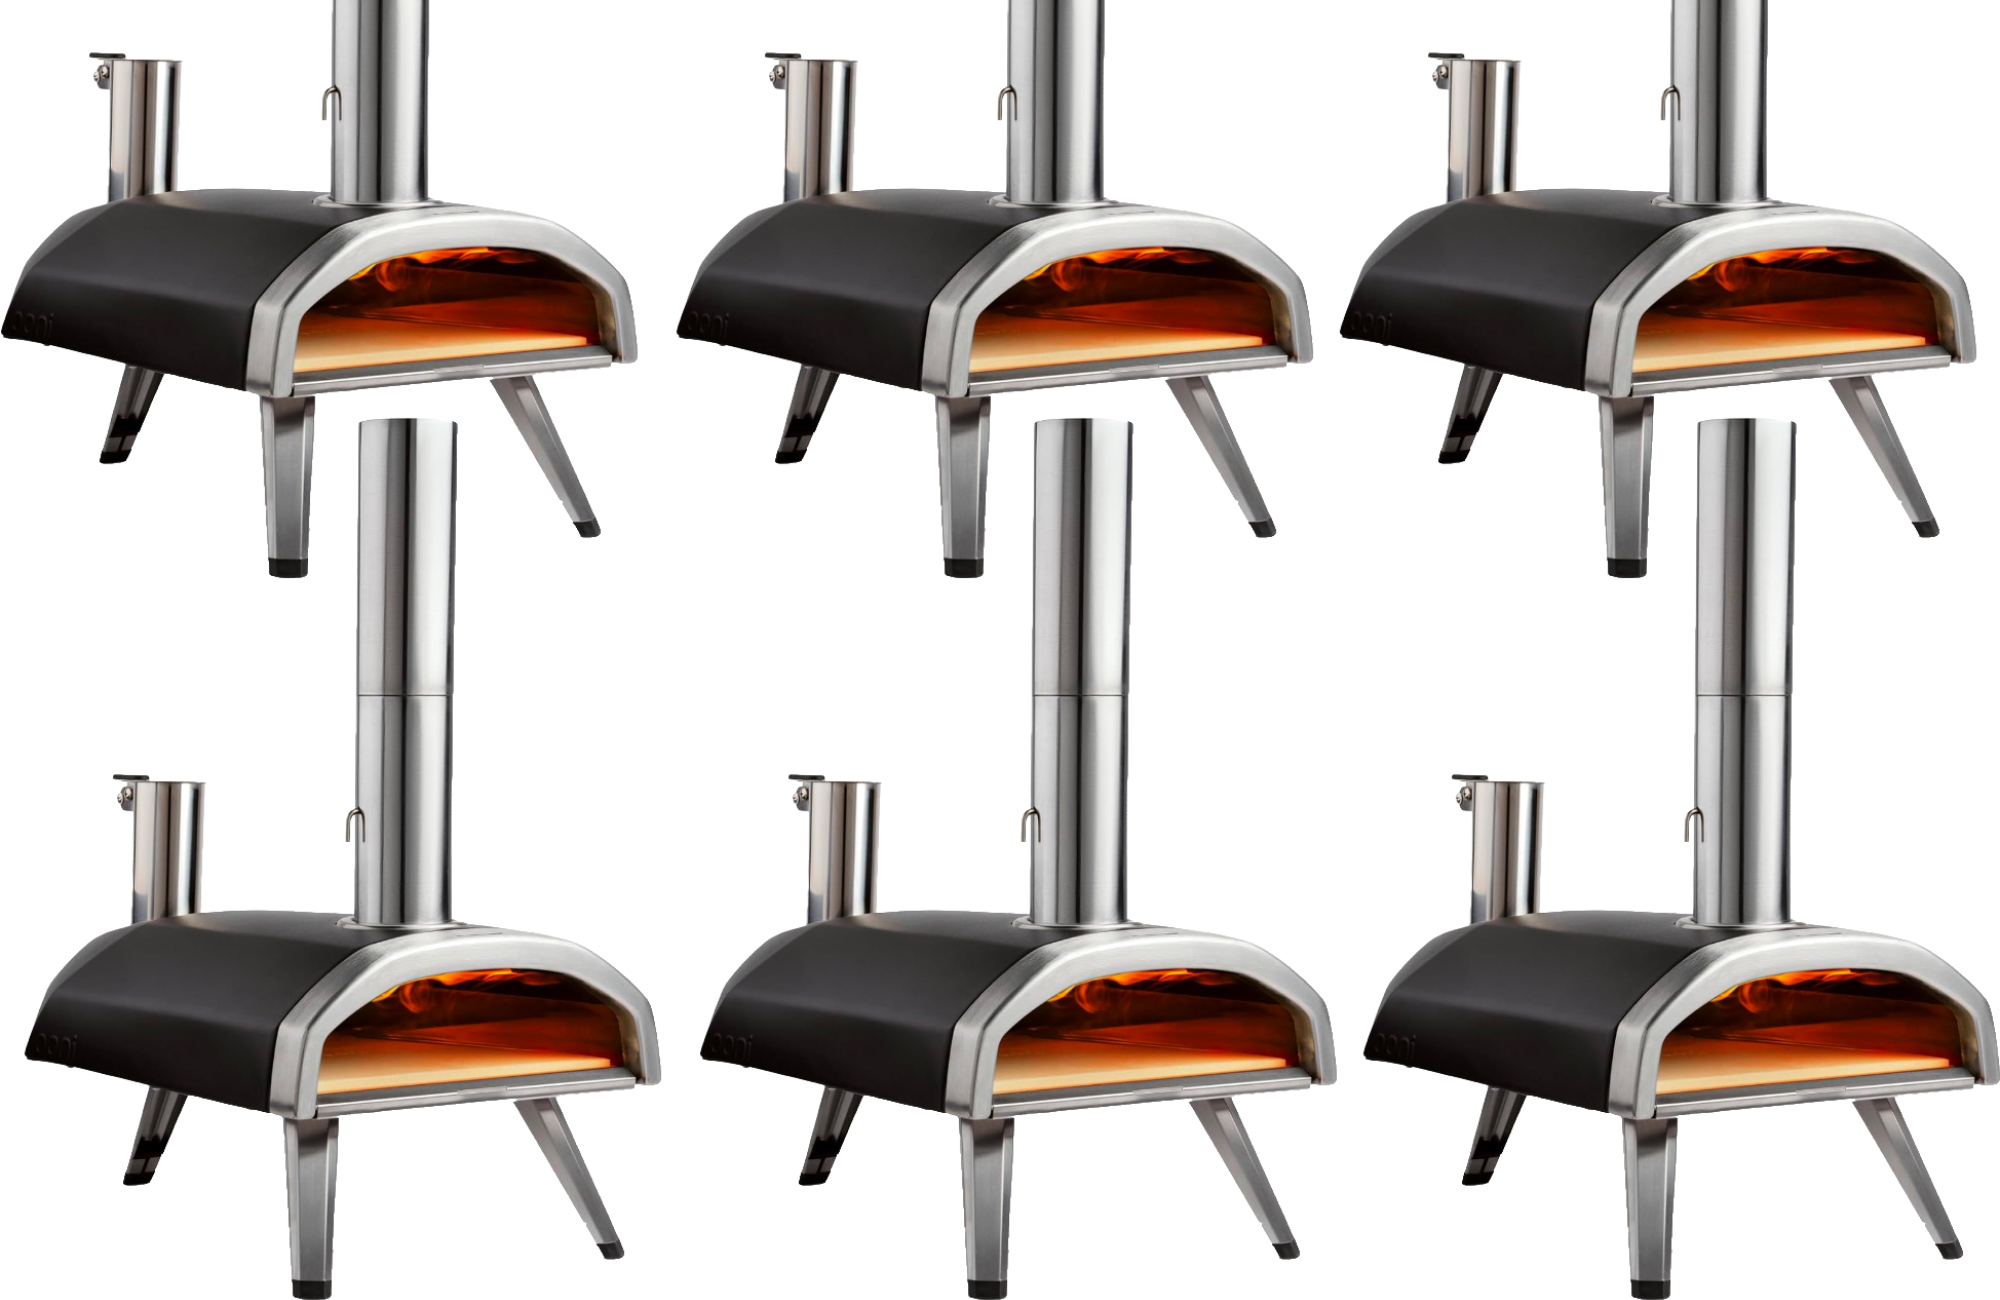 How To Cook With Ooni Fyra 12 Pizza Oven